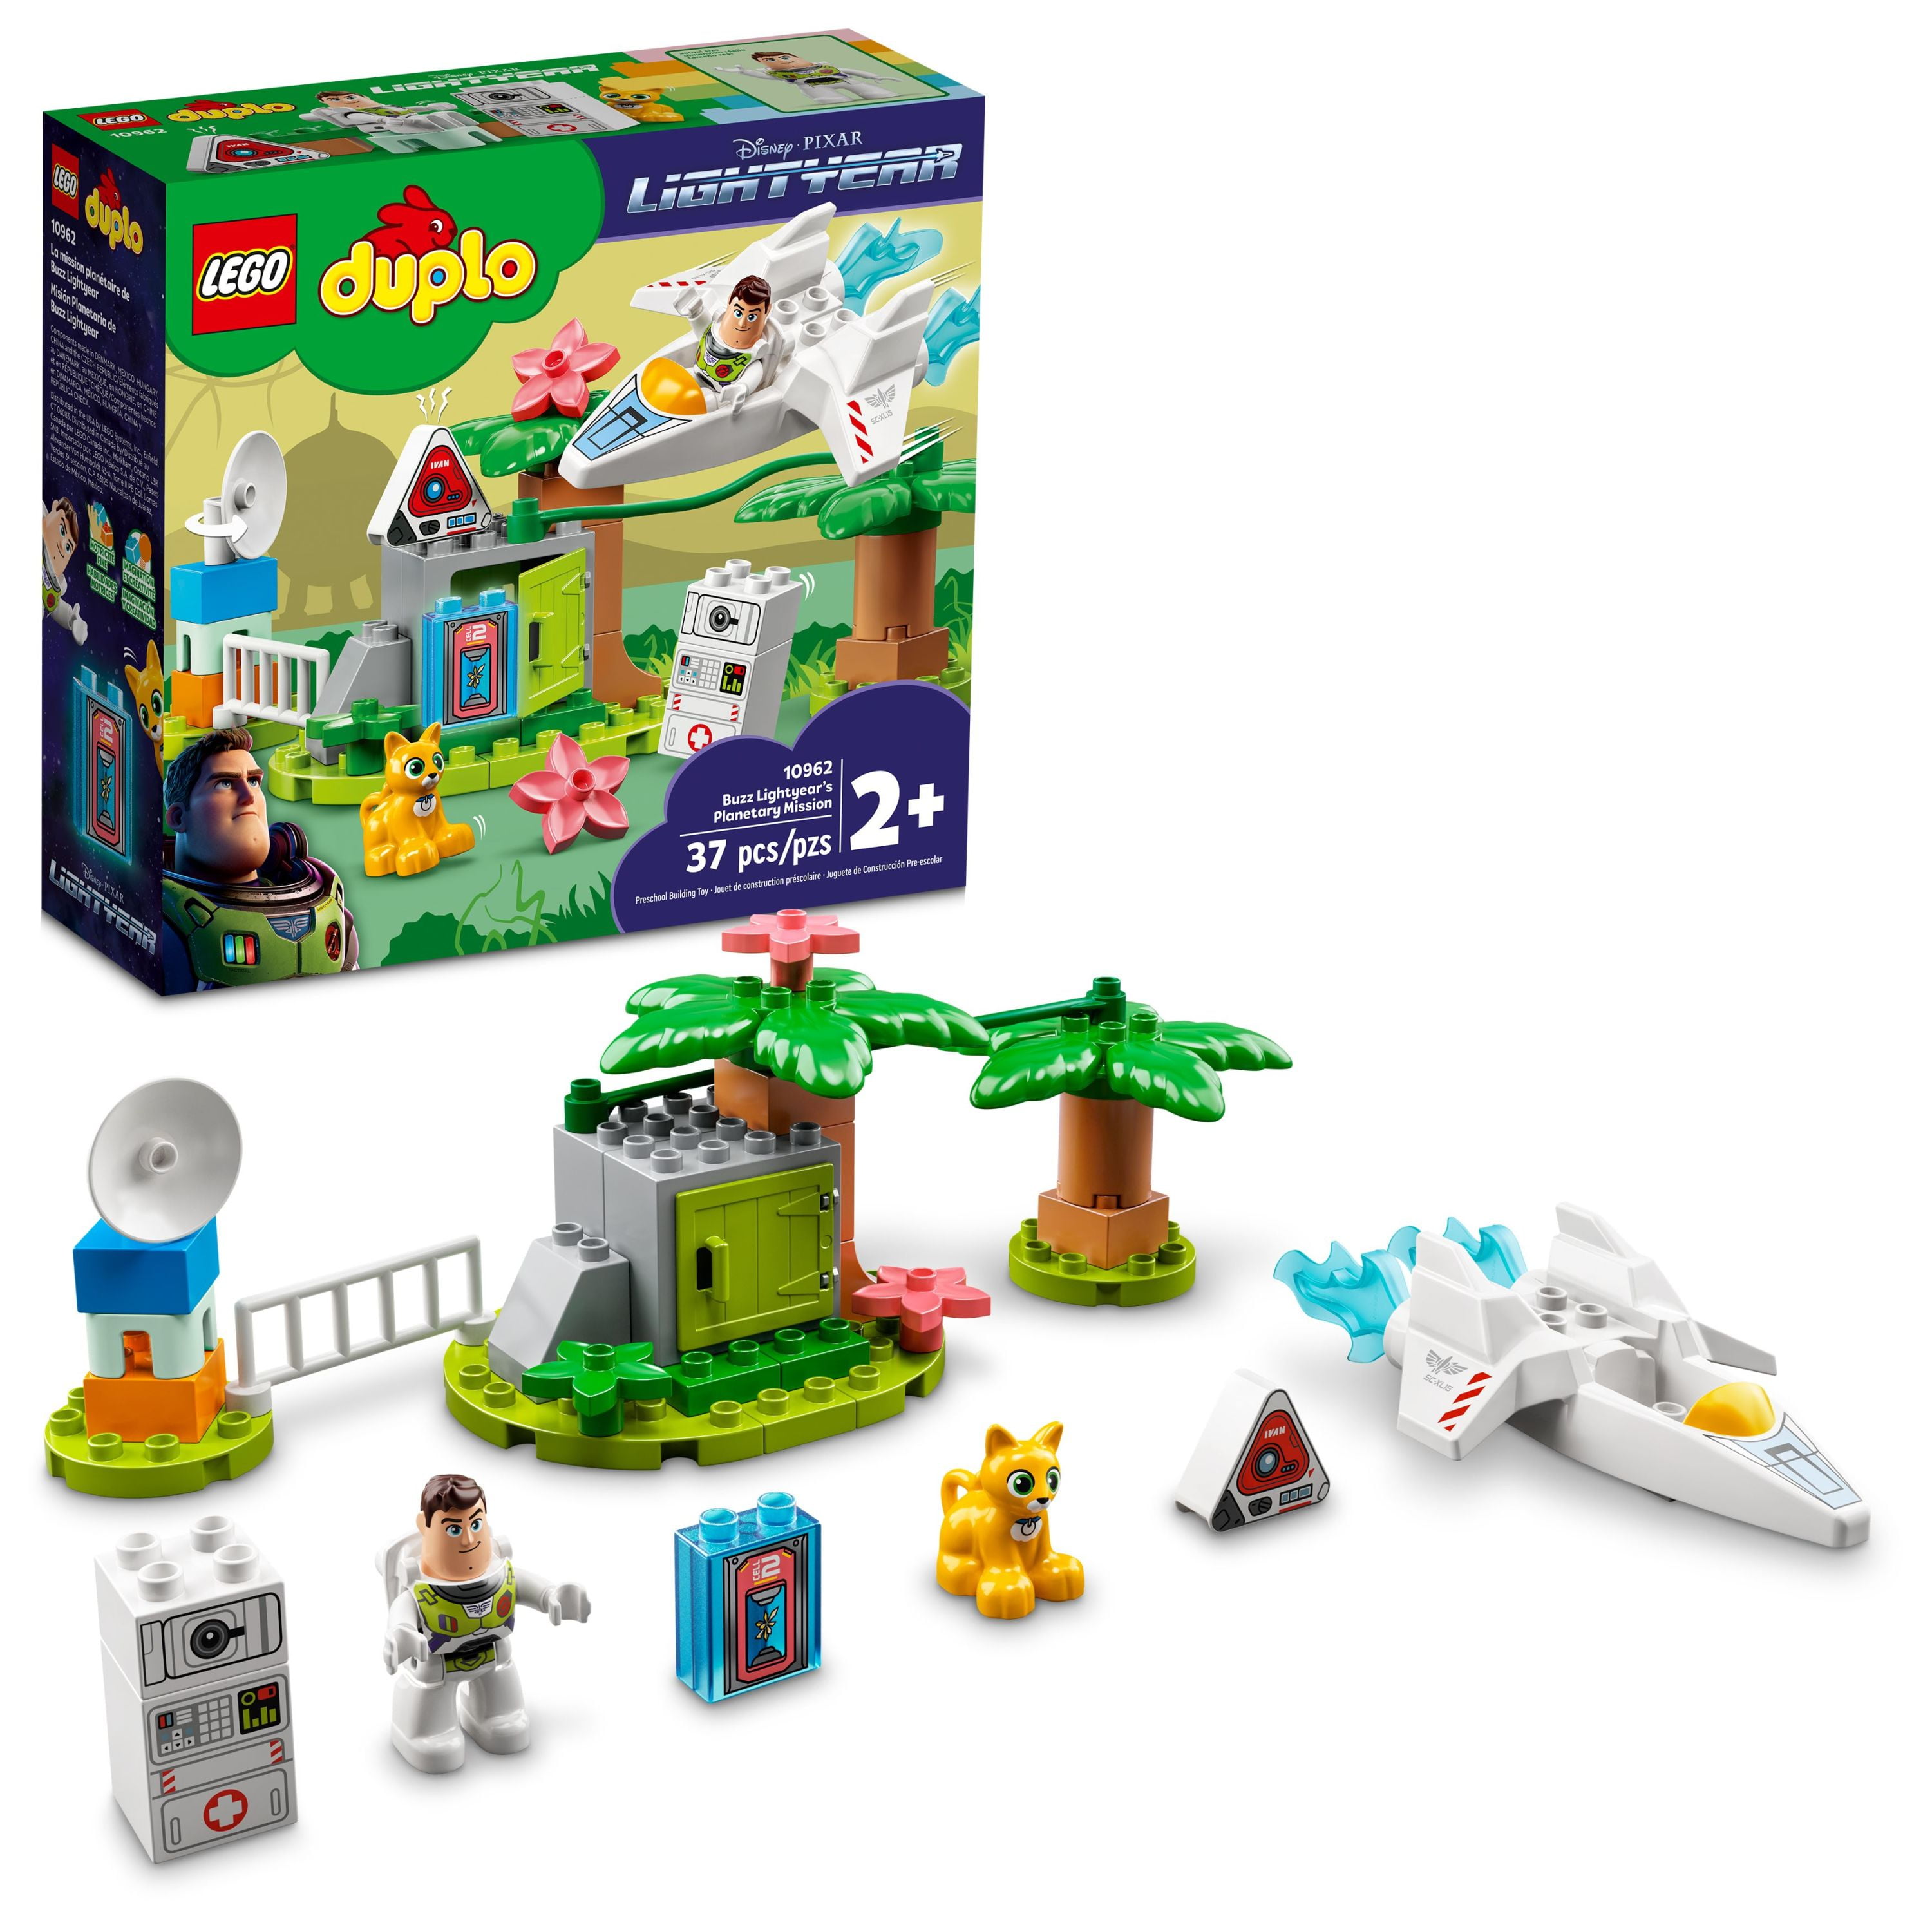 LEGO DUPLO and Pixar Buzz Lightyear's Planetary Mission Space Toys for Toddlers, Boys Girls 2 Plus Years Old with Spaceship & Robot Figure - Walmart.com